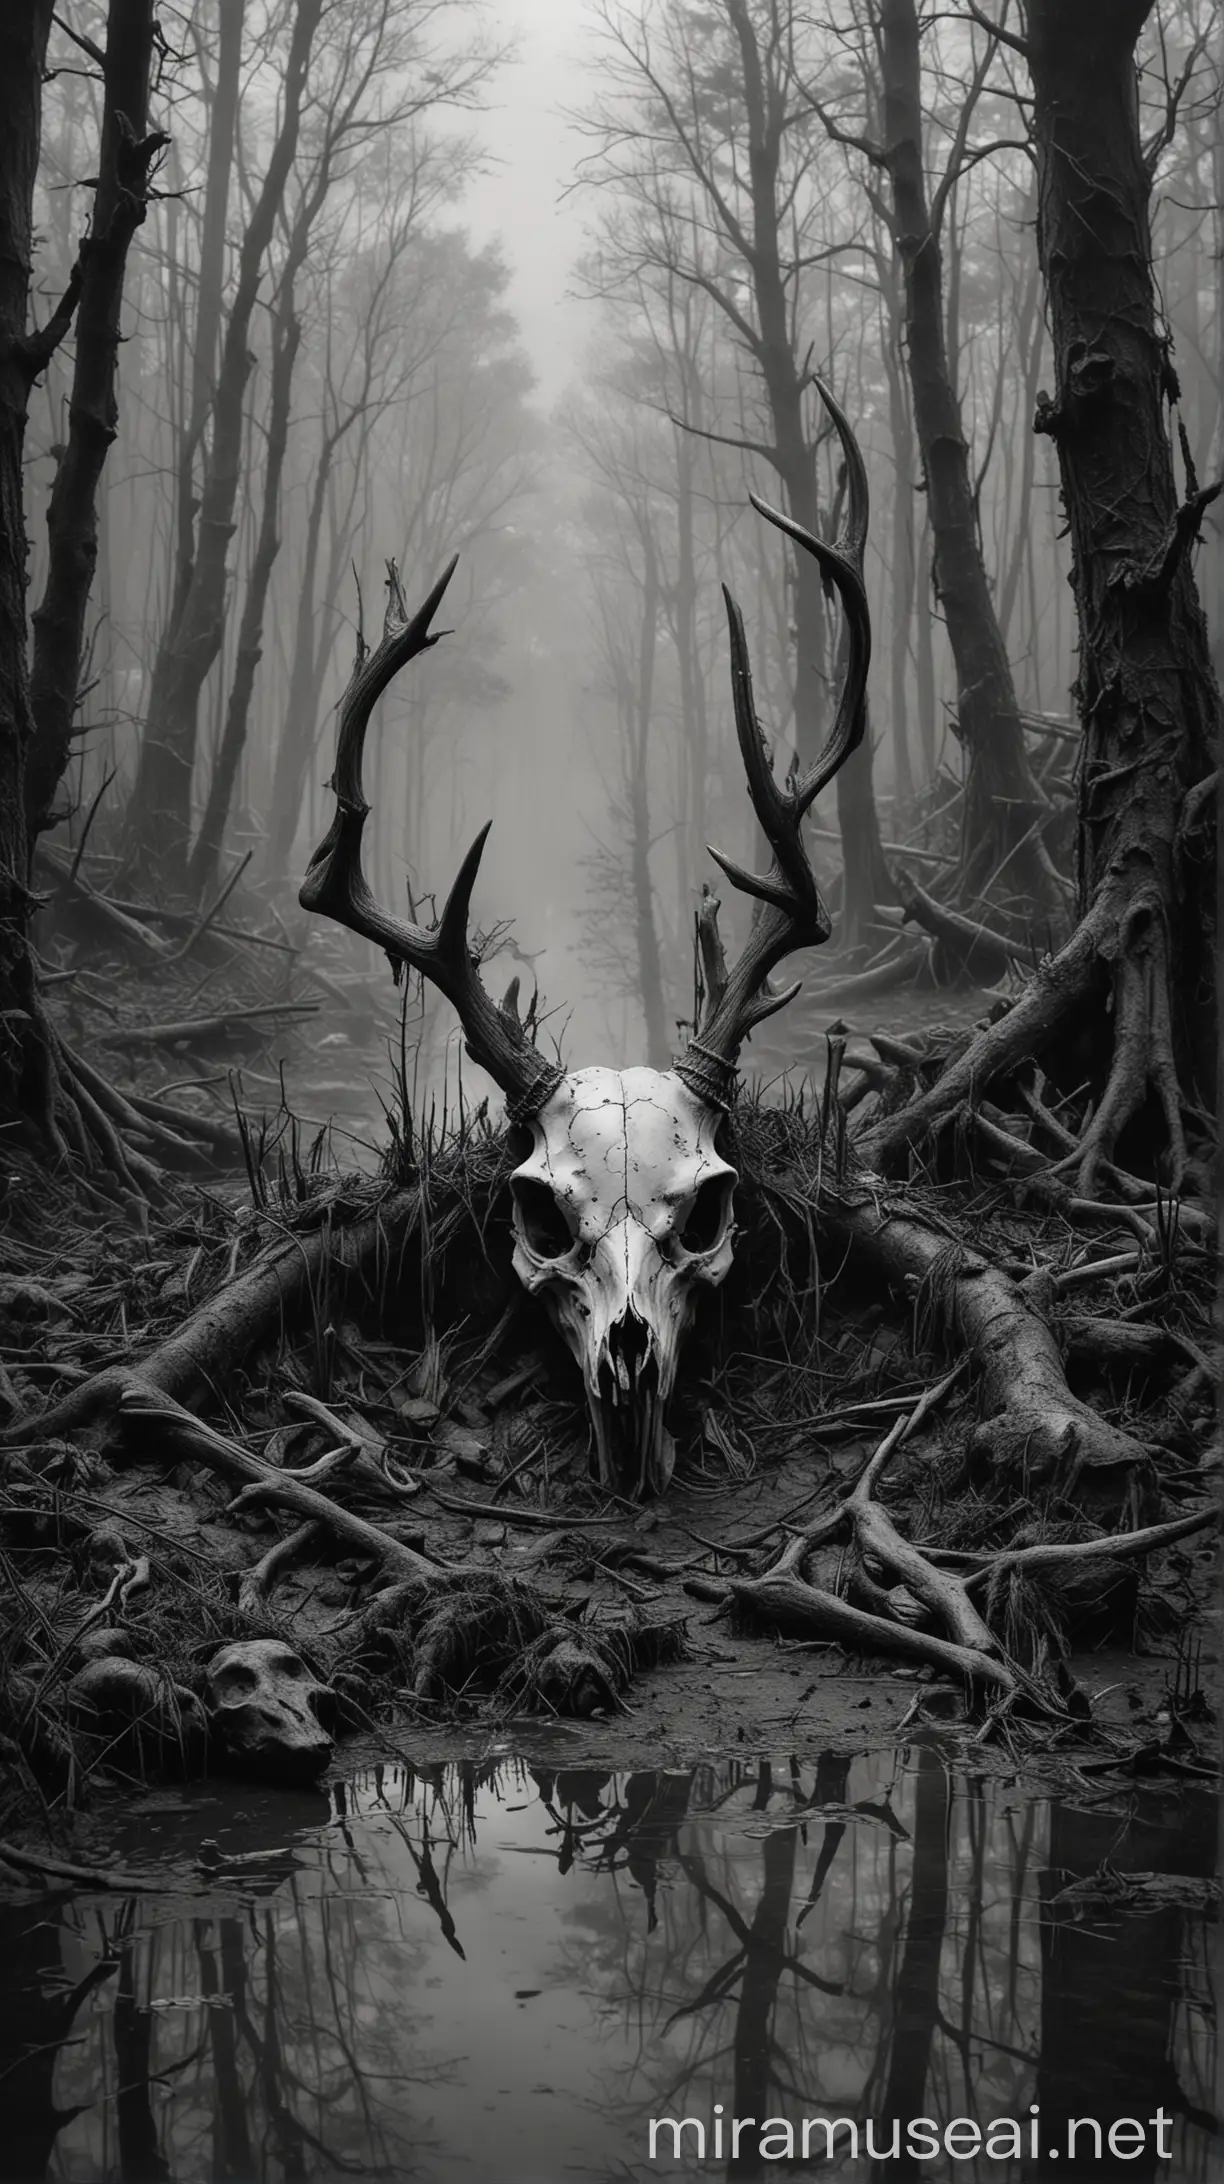 Gloomy Forest Dark Art Depicting Life and Death with Deer Skull in Swamp